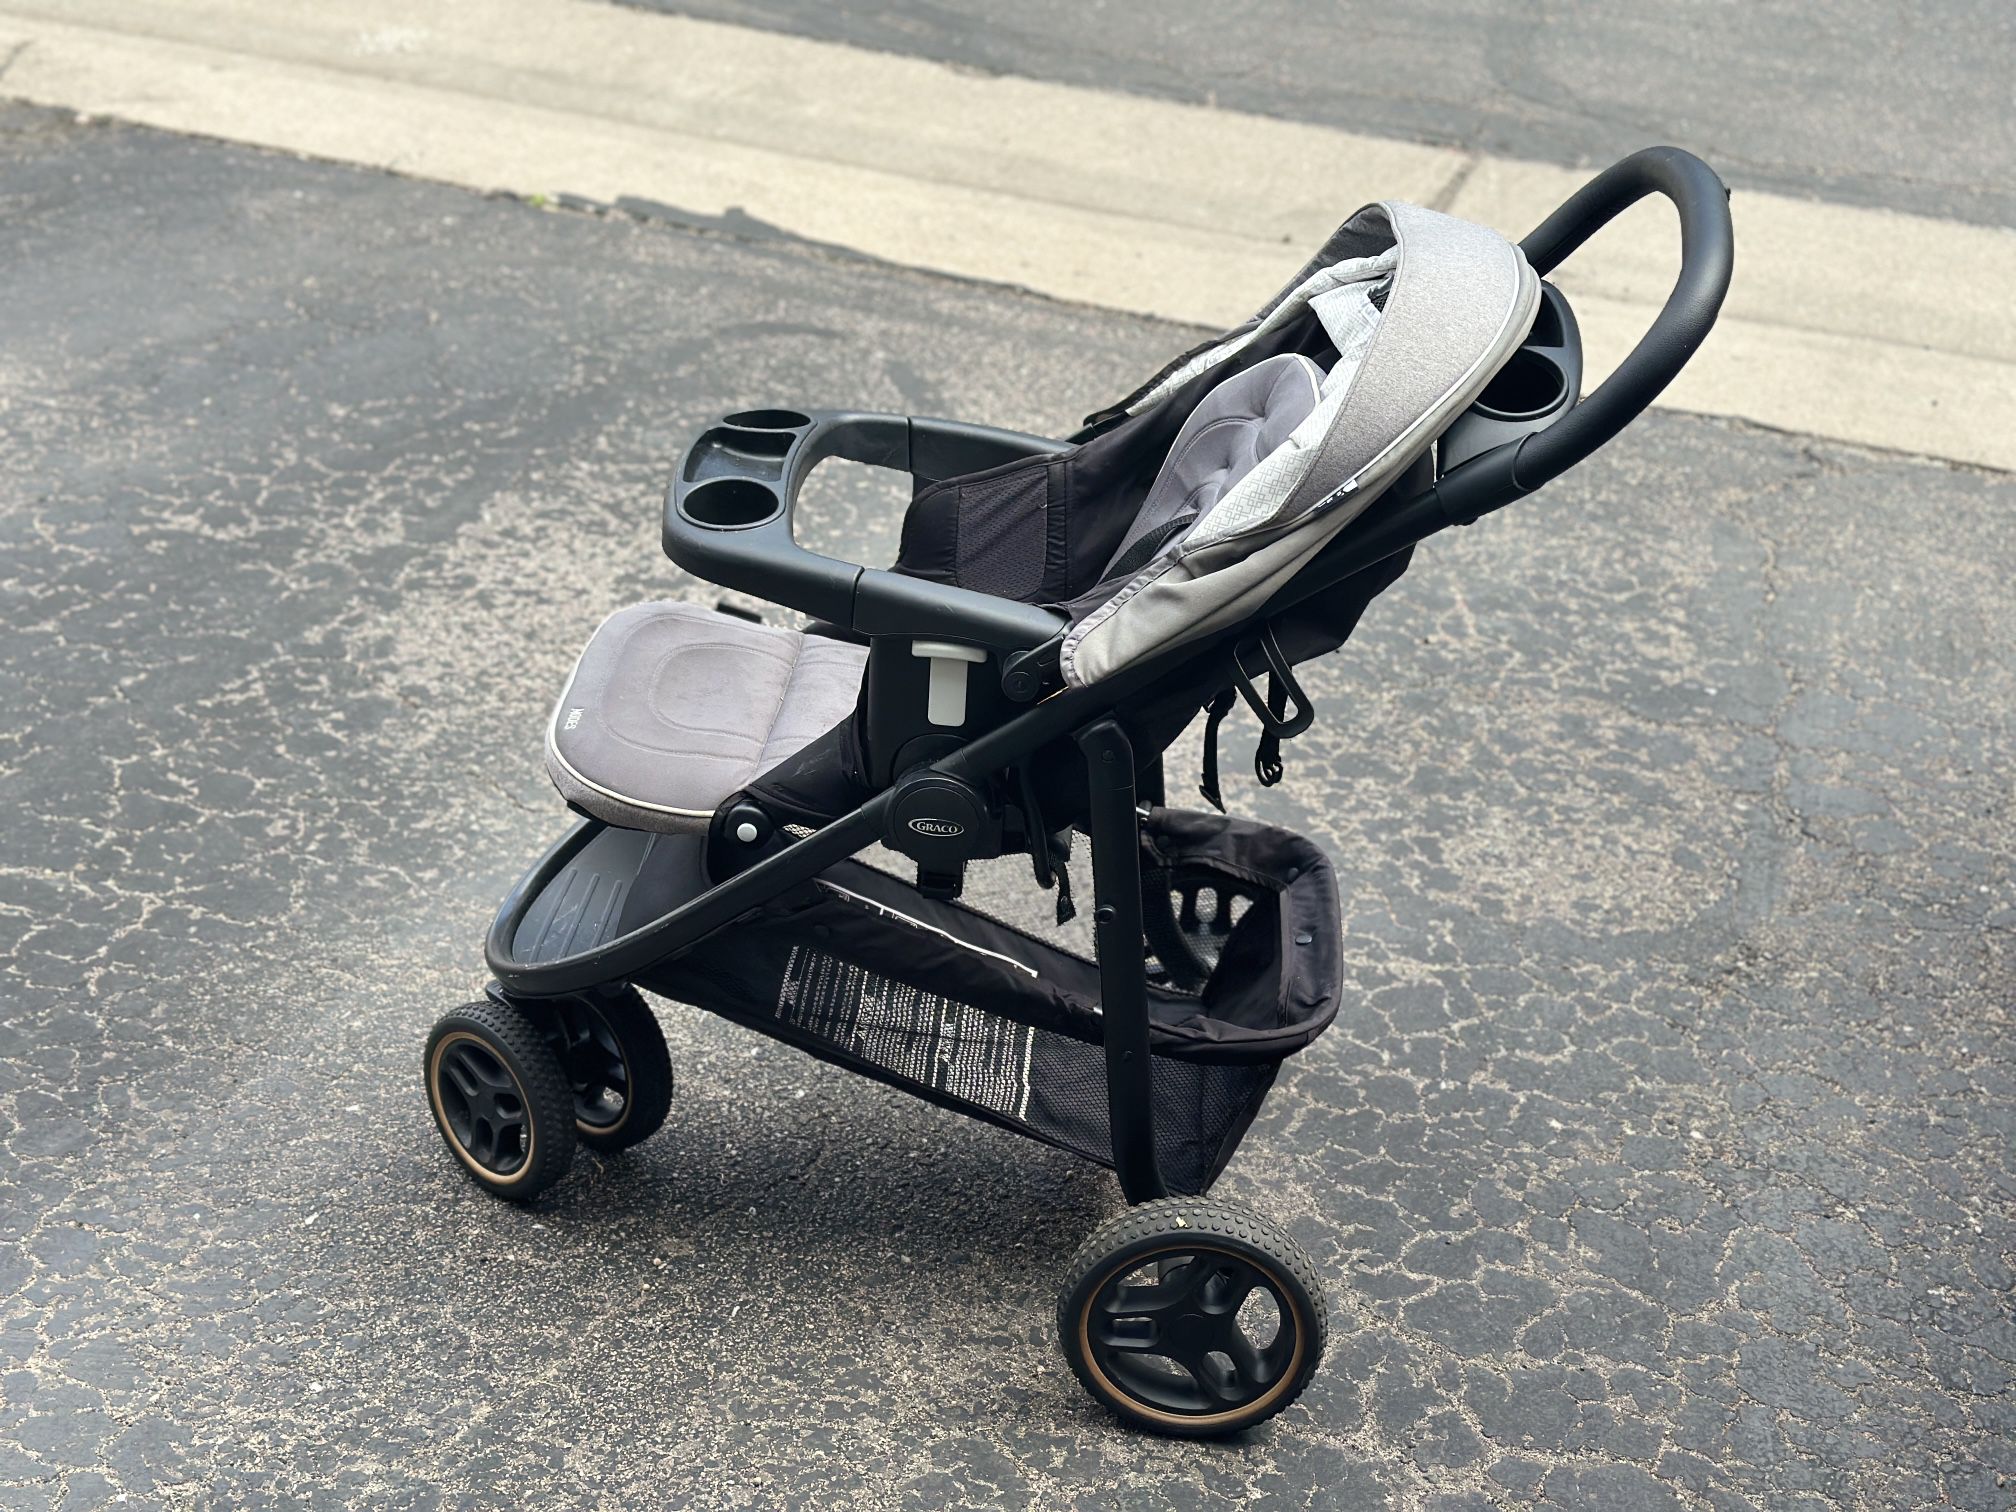 Graco kids Stroller and car seat